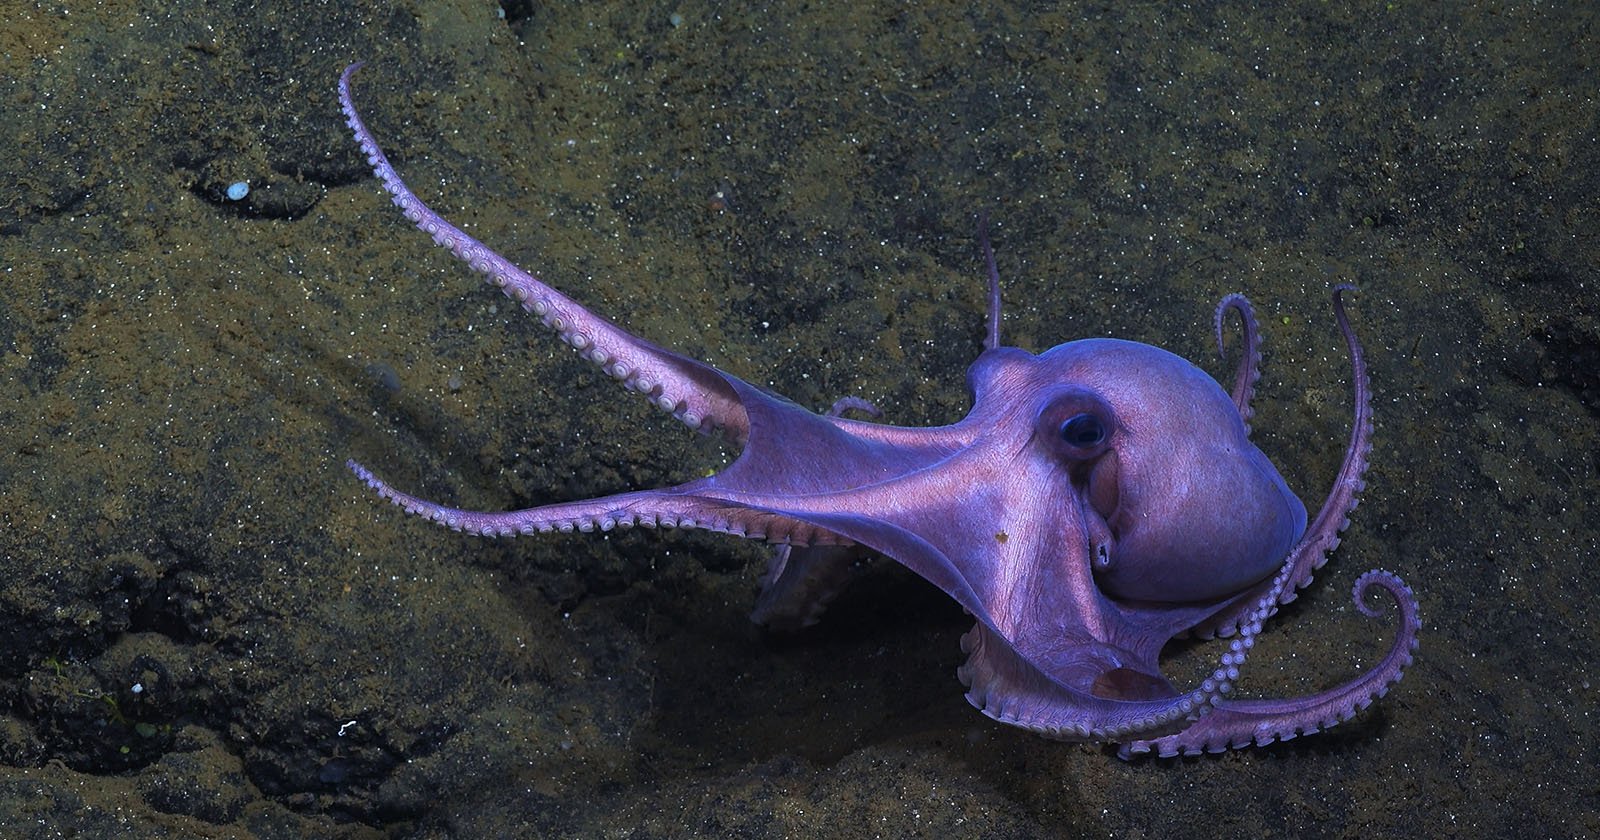 How Secrets of the Octopus Shows the Beauty, Intelligence, and Alien Charm of Octopuses